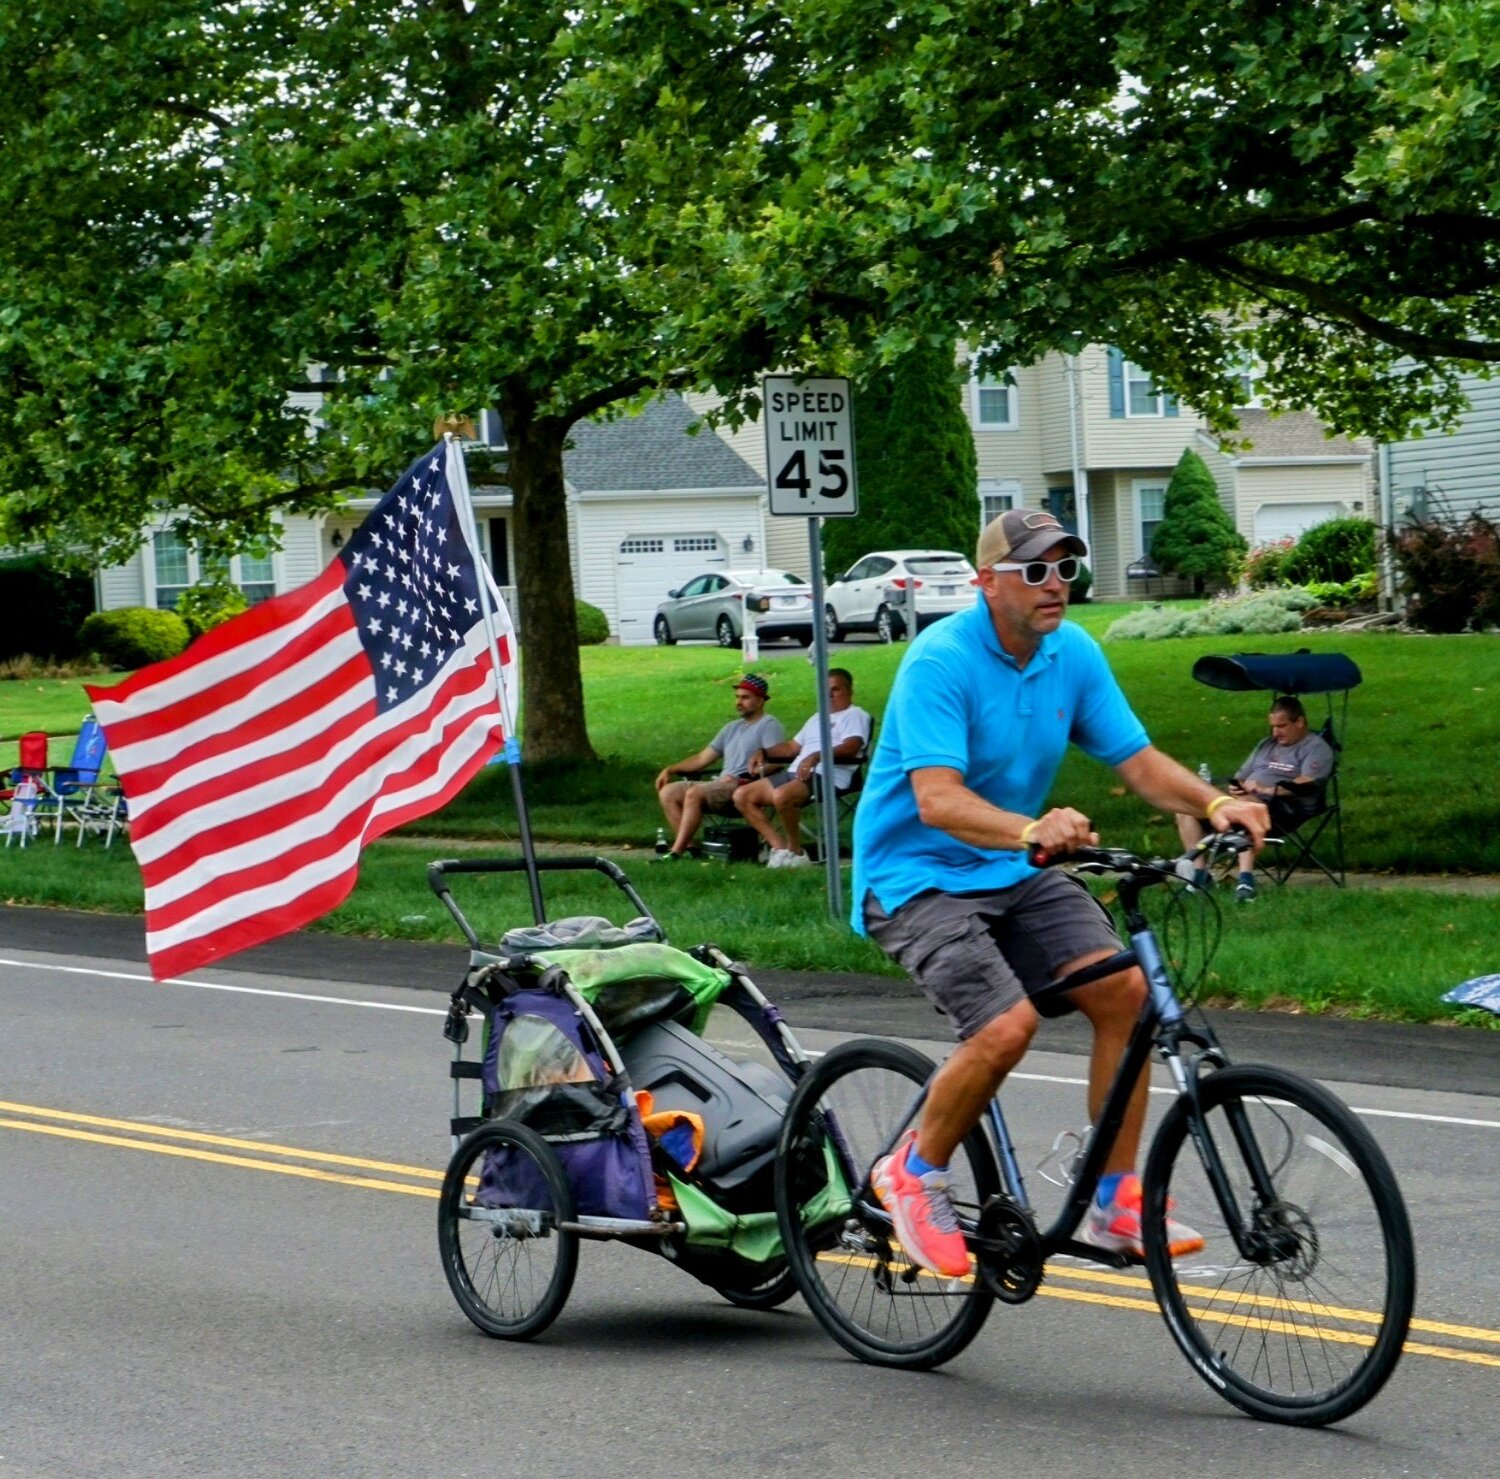 Tim McAnany, of Chalfont, cycles through town towing an American flag during the Tri-Municipal July 4 Parade.